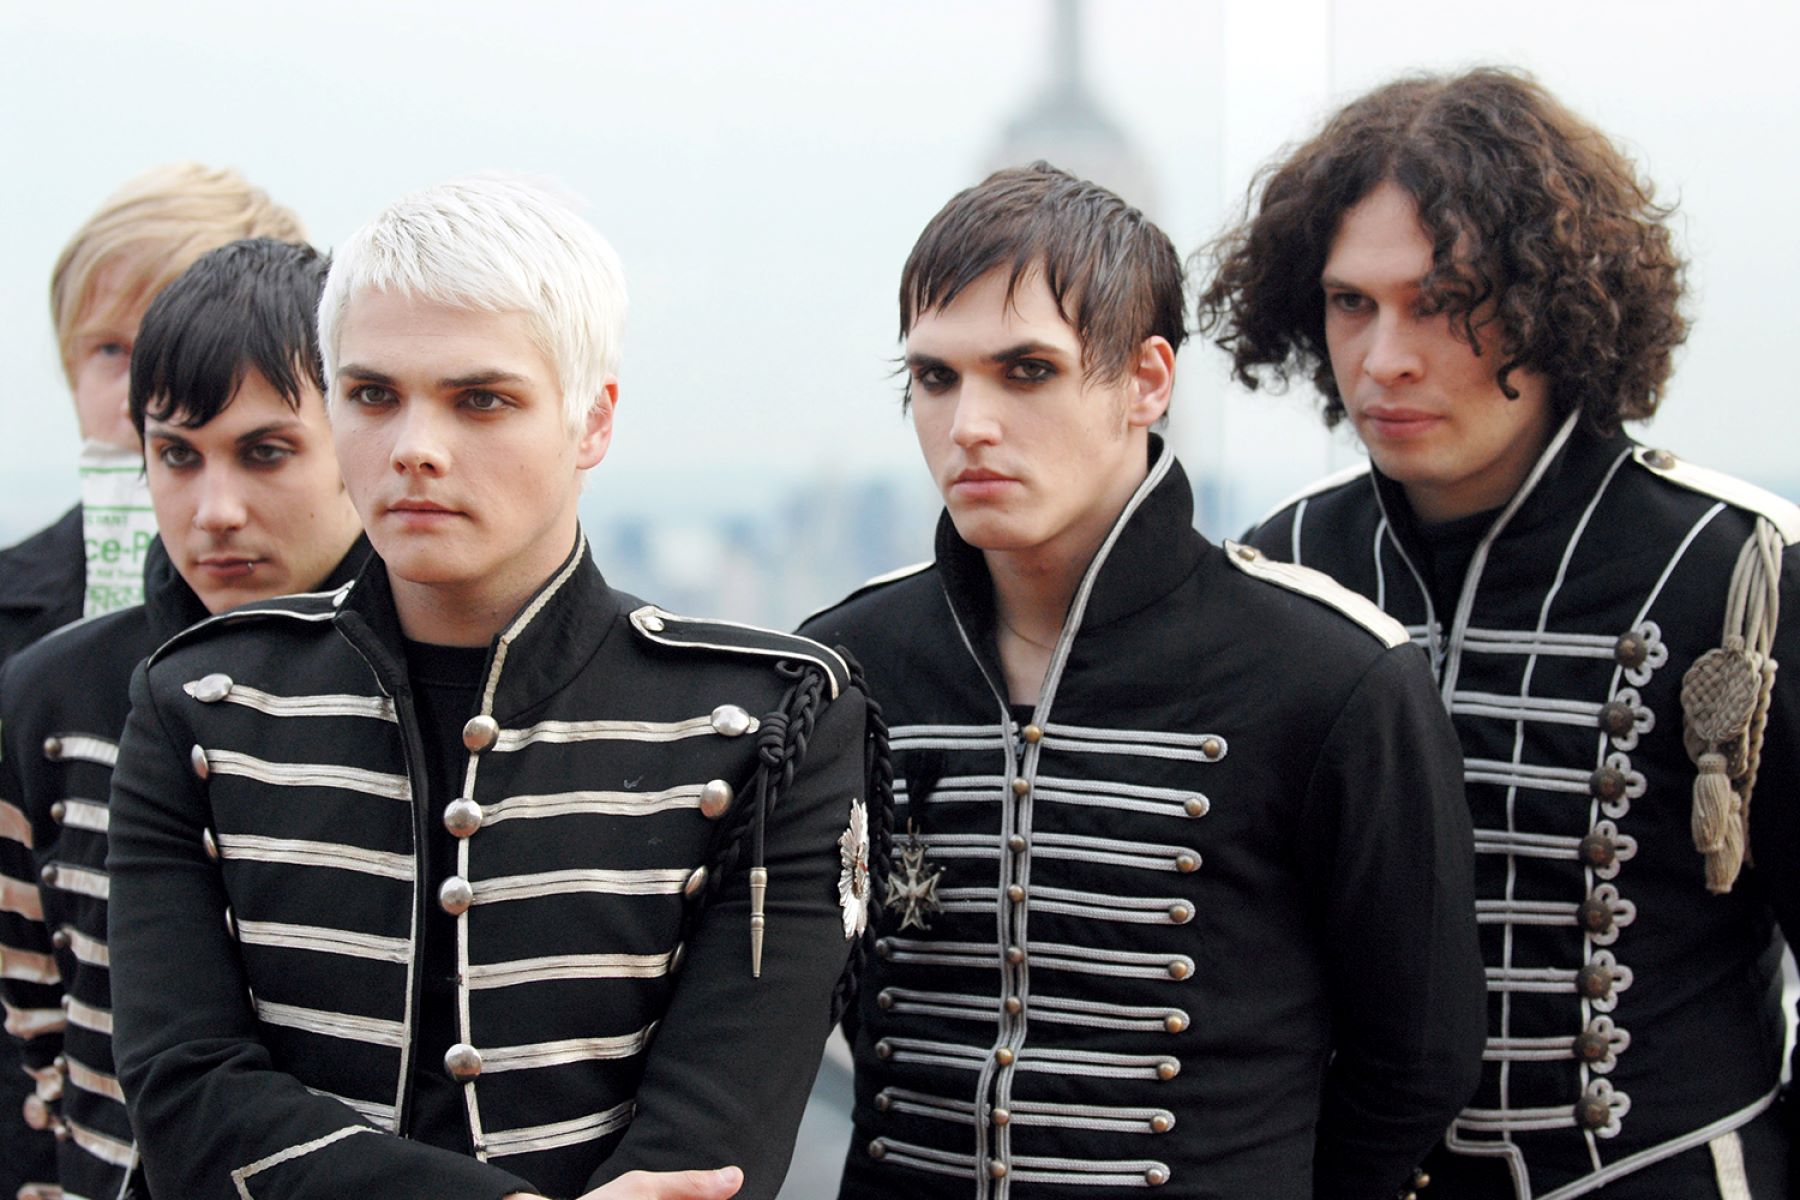 What Record Label Is My Chemical Romance With